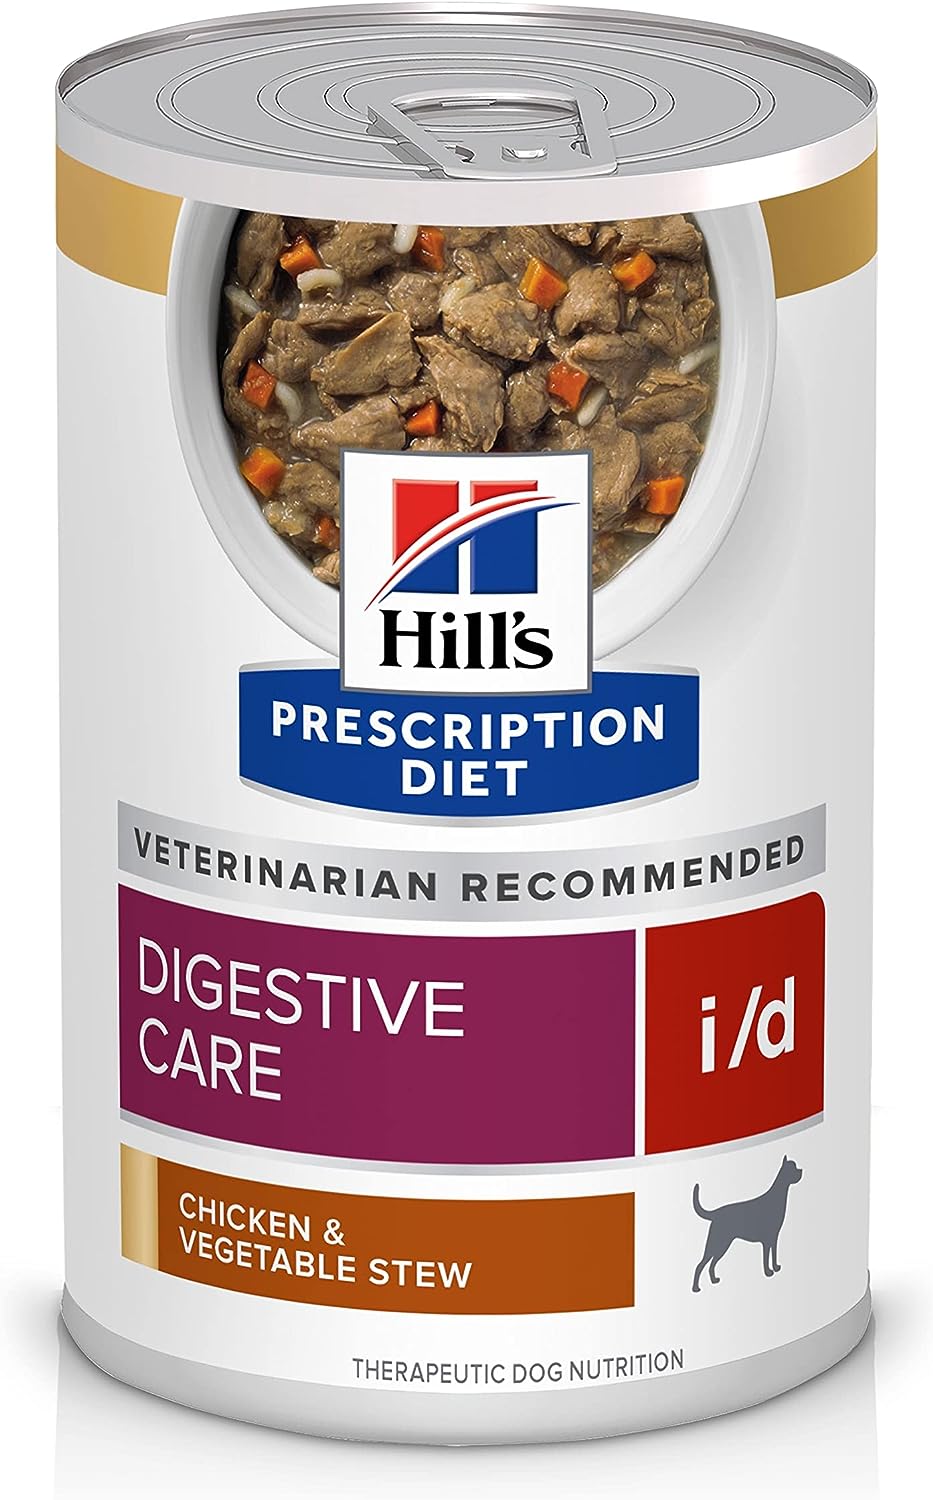 Hill's Prescription Diet i/d Digestive Care Chicken & Vegetable Stew Canned Dog Food, Veterinary Diet, 12.5 oz., 12-Pack Wet Food